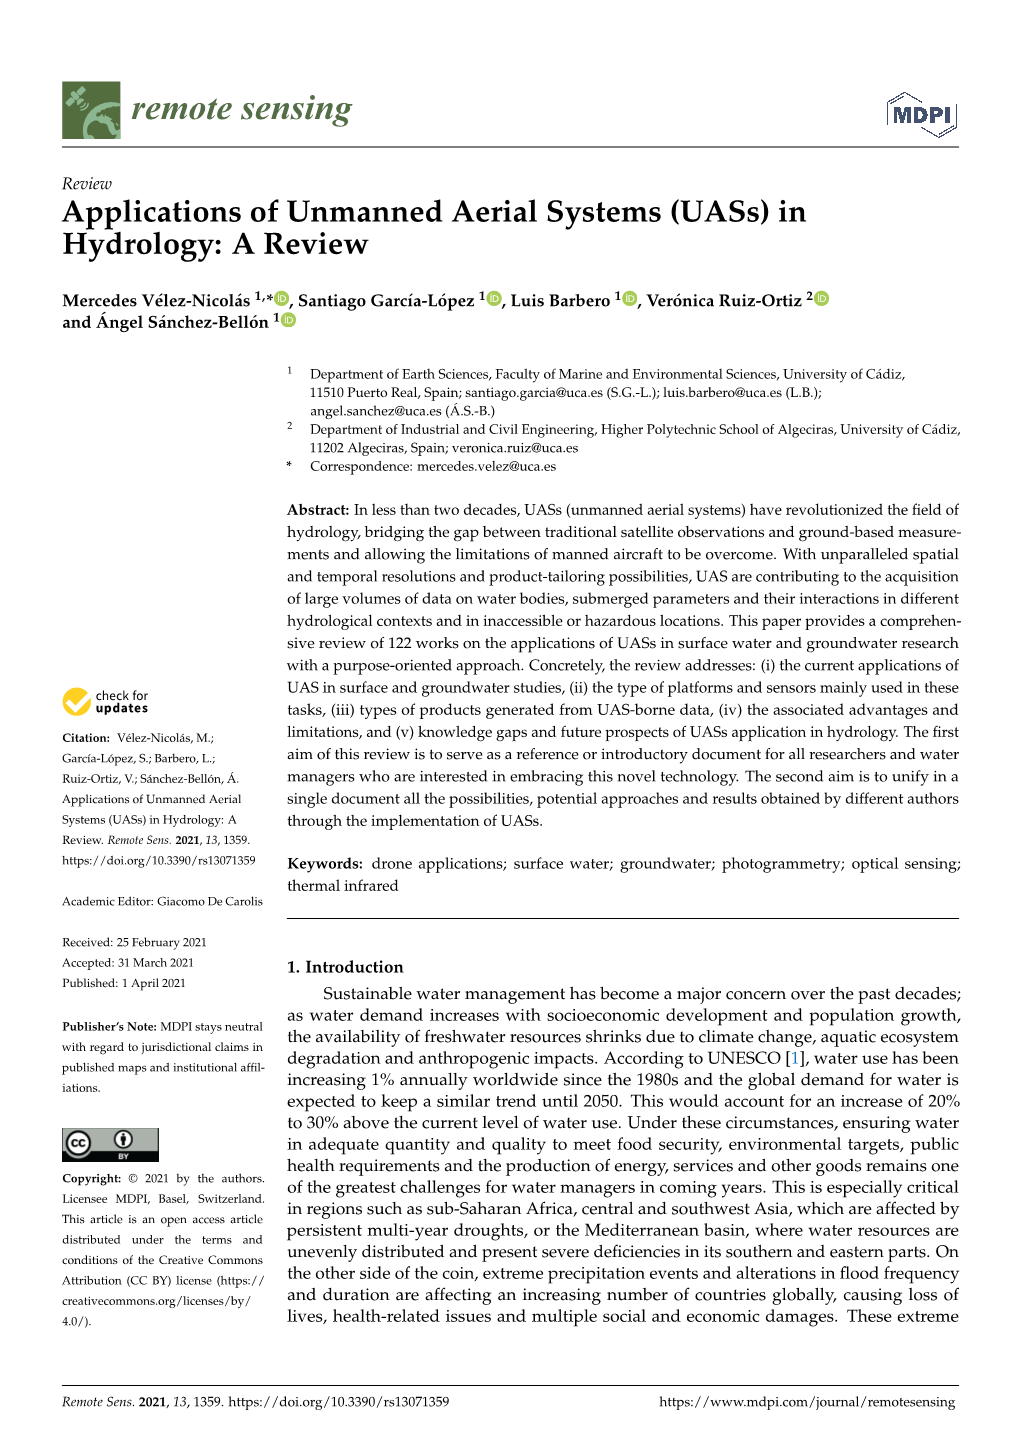 Applications of Unmanned Aerial Systems (Uass) in Hydrology: a Review